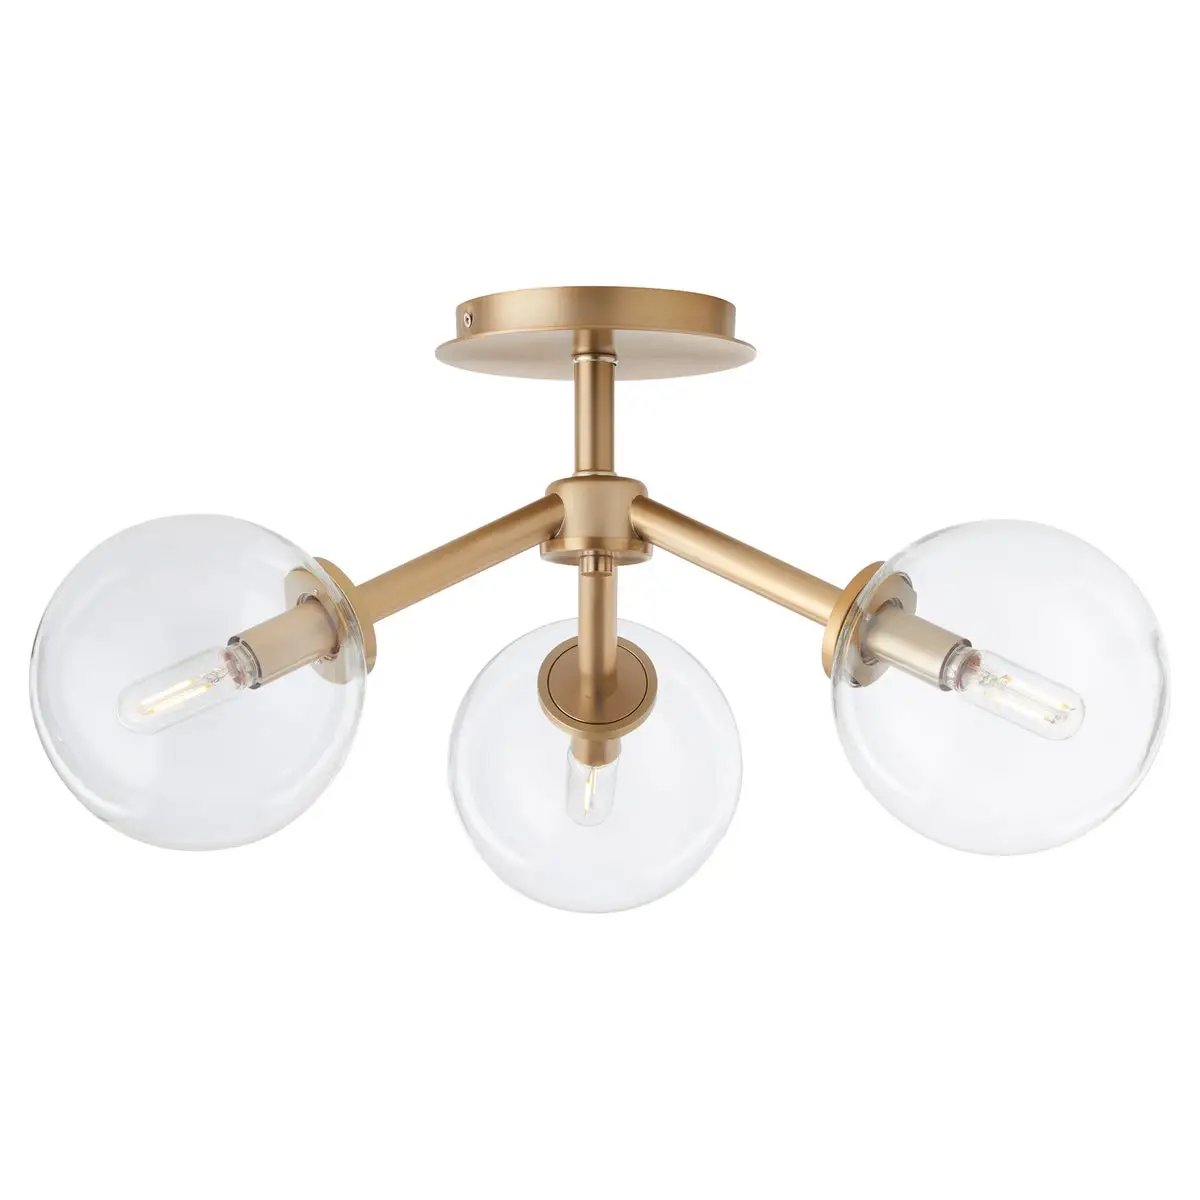 Sputnik Flush Mount Ceiling Light with clear glass globes and aged brass frames. Mid-century modern appeal. 3 bulbs, 60W, dimmable. UL Listed. 21"W x 10.5"H.